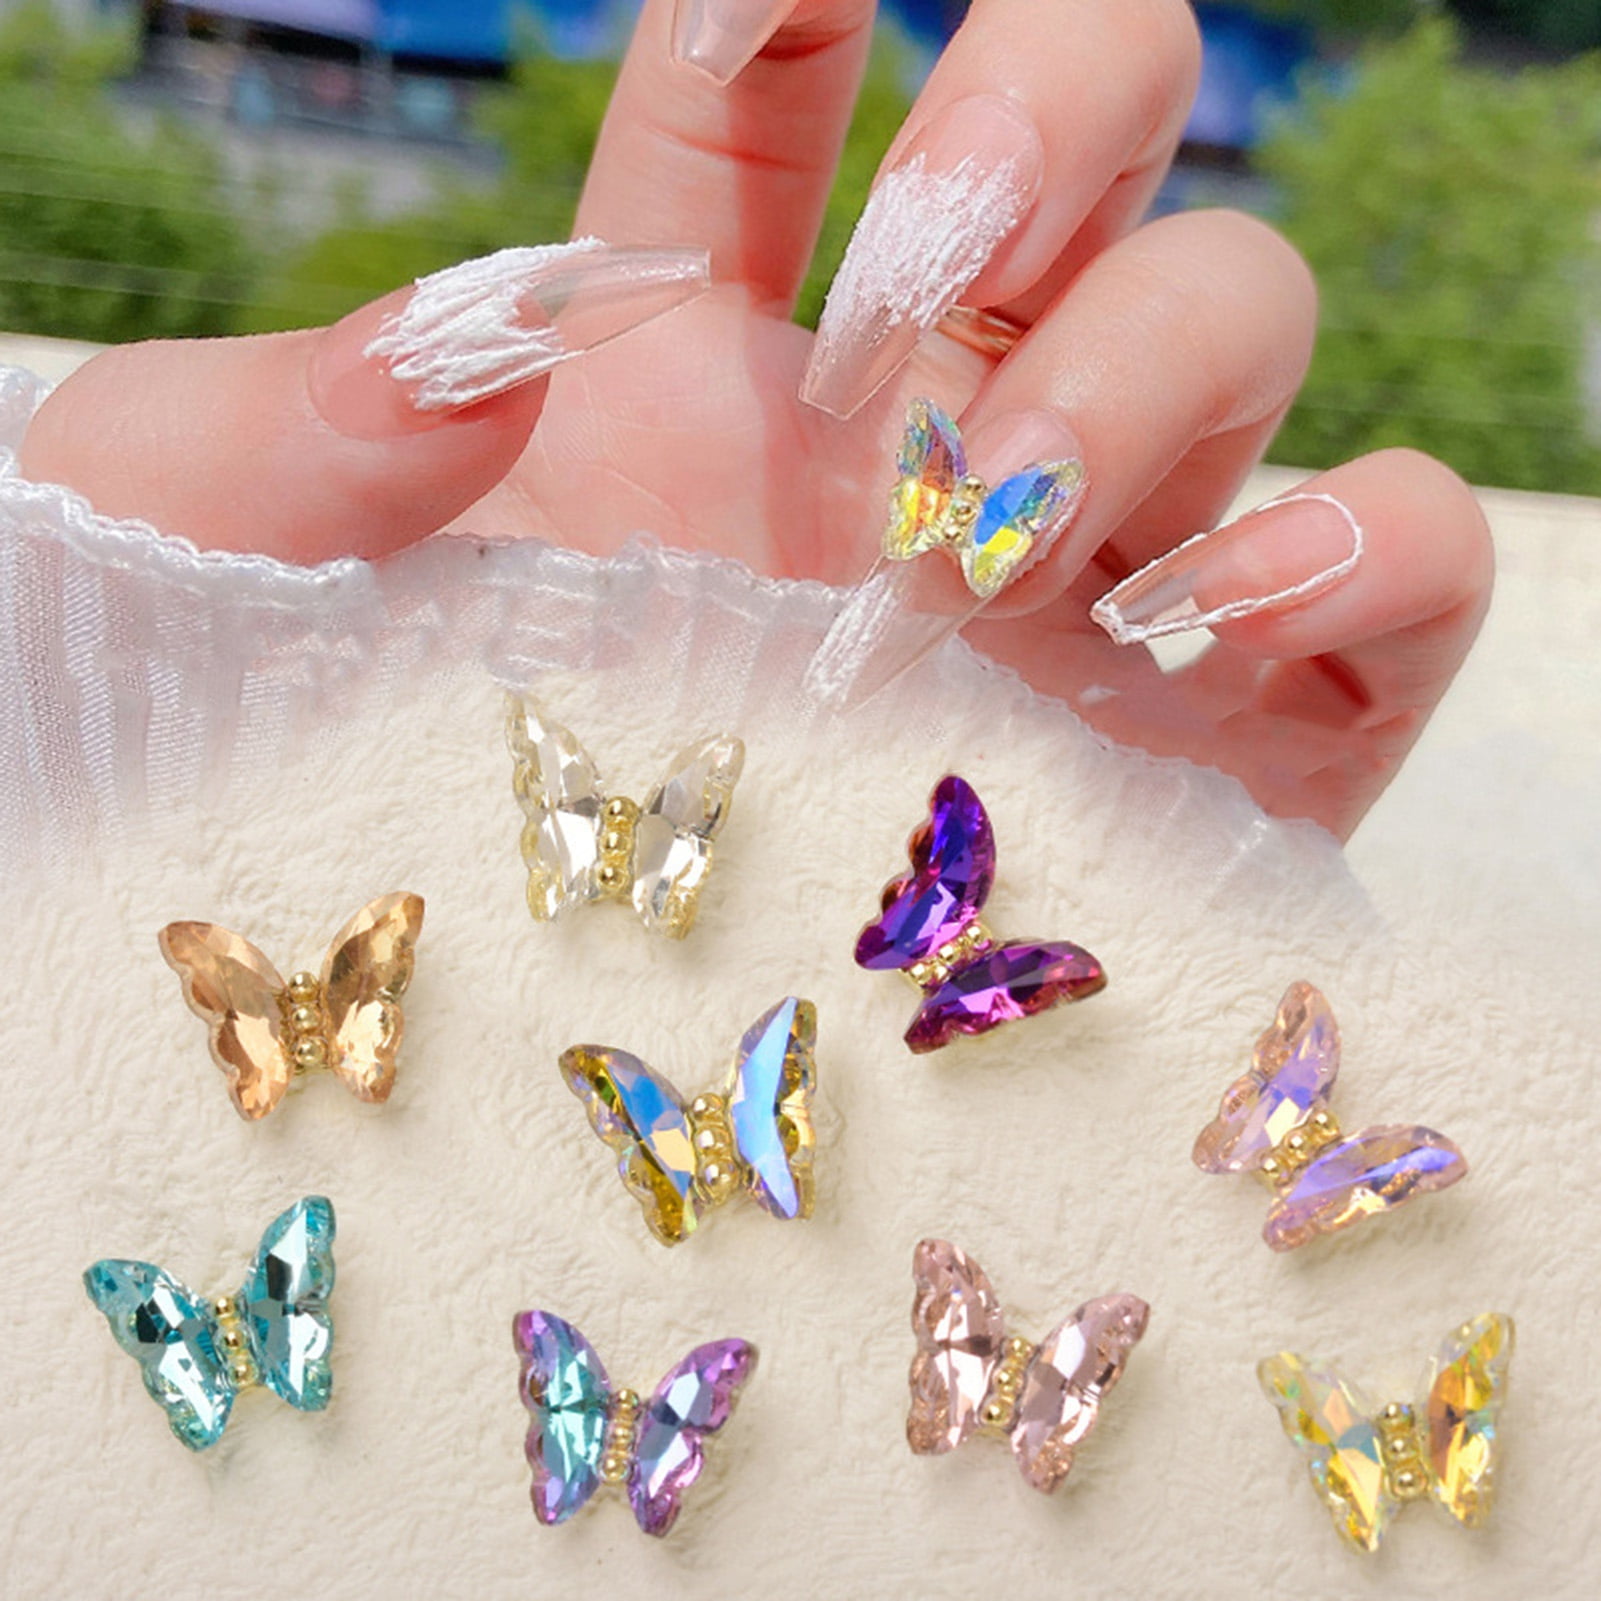 Buy MAYCREATE® 2 Boxes 3D Nail Art Kit Fruit Polymer Slices DIY Nail Art  Slices Colorful Crystal Flower Fruit Clay Nail Slice Nails Sequins DIY Nail  Art Marking Tools Online at Low